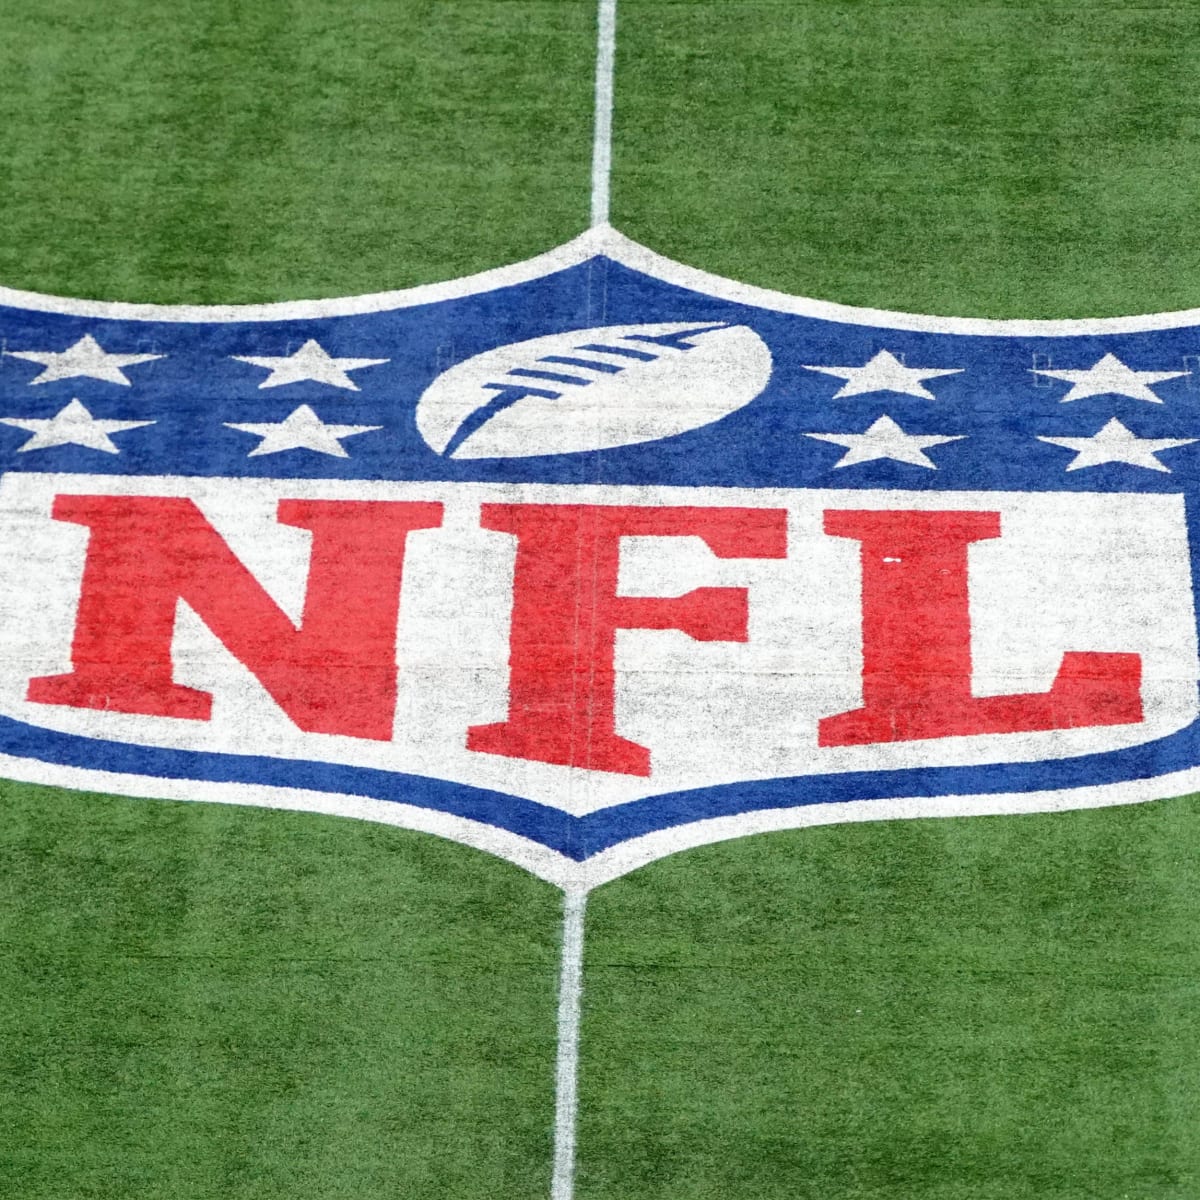 NFL on X: The biggest Sunday Night Football schedule ever